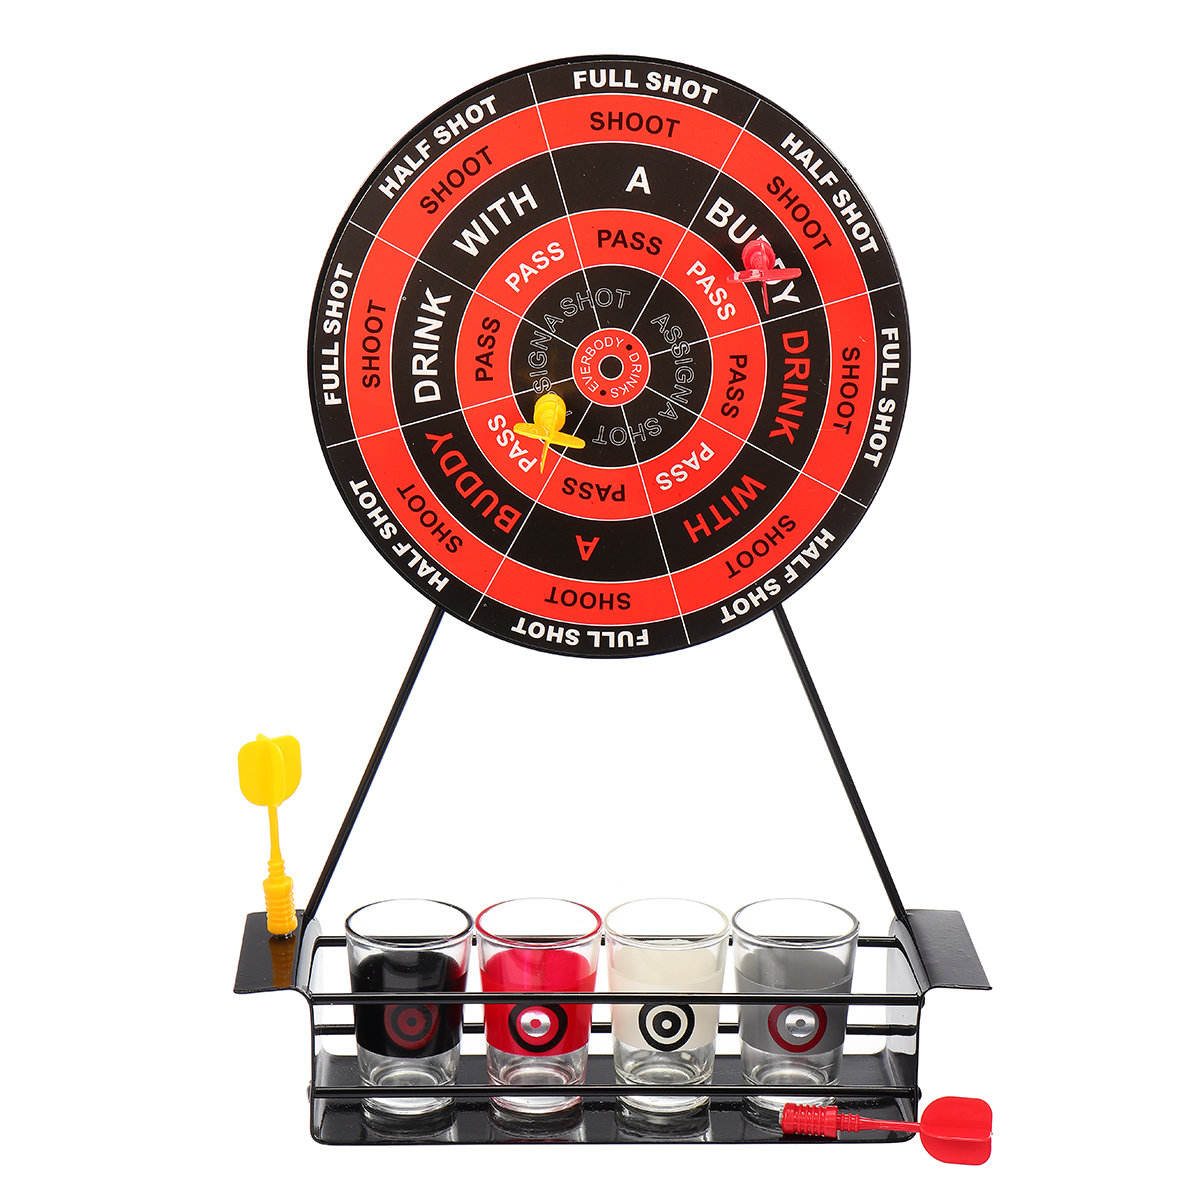 KCASA BT-500 Creative Mini Magnet Darts Toy Shot Set Party Entertainment Drinking Game with Glass Cu